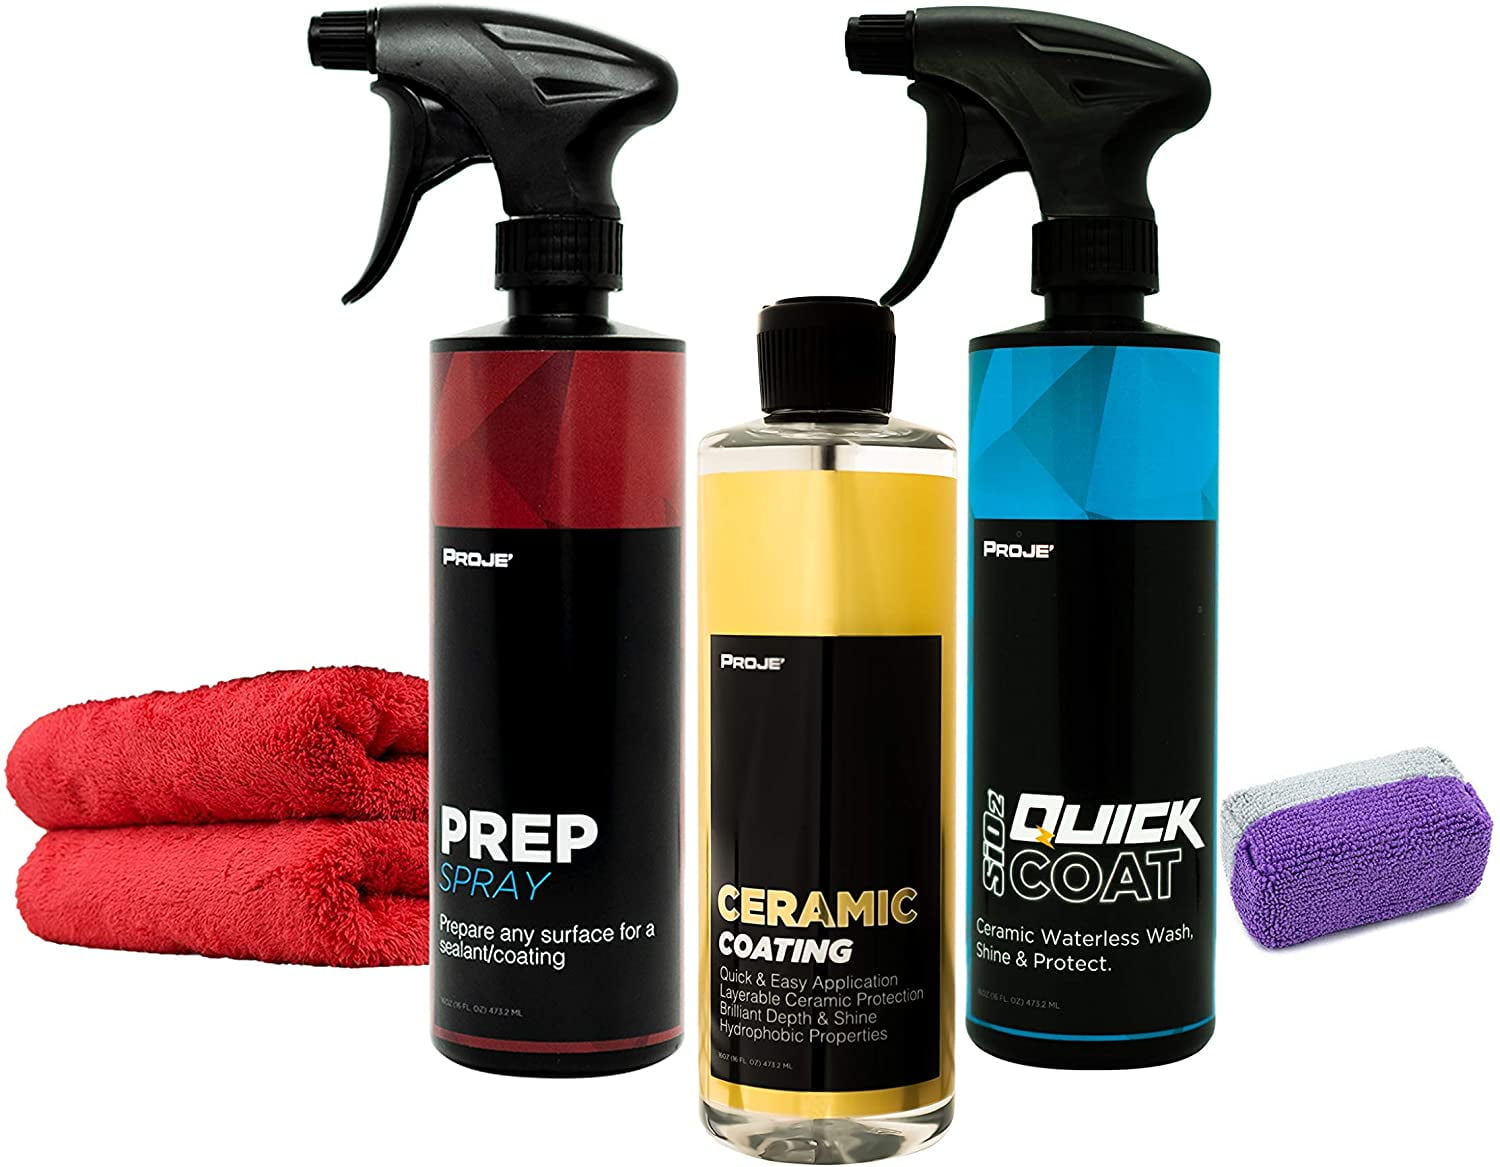 Primo Detailing Studio - Are you a DIYer? PRIMO has developed a touchless  car wash soap specifically formulated for ceramic coated vehicles! No need  for mitts, chamois, brushes or buckets, simply foam